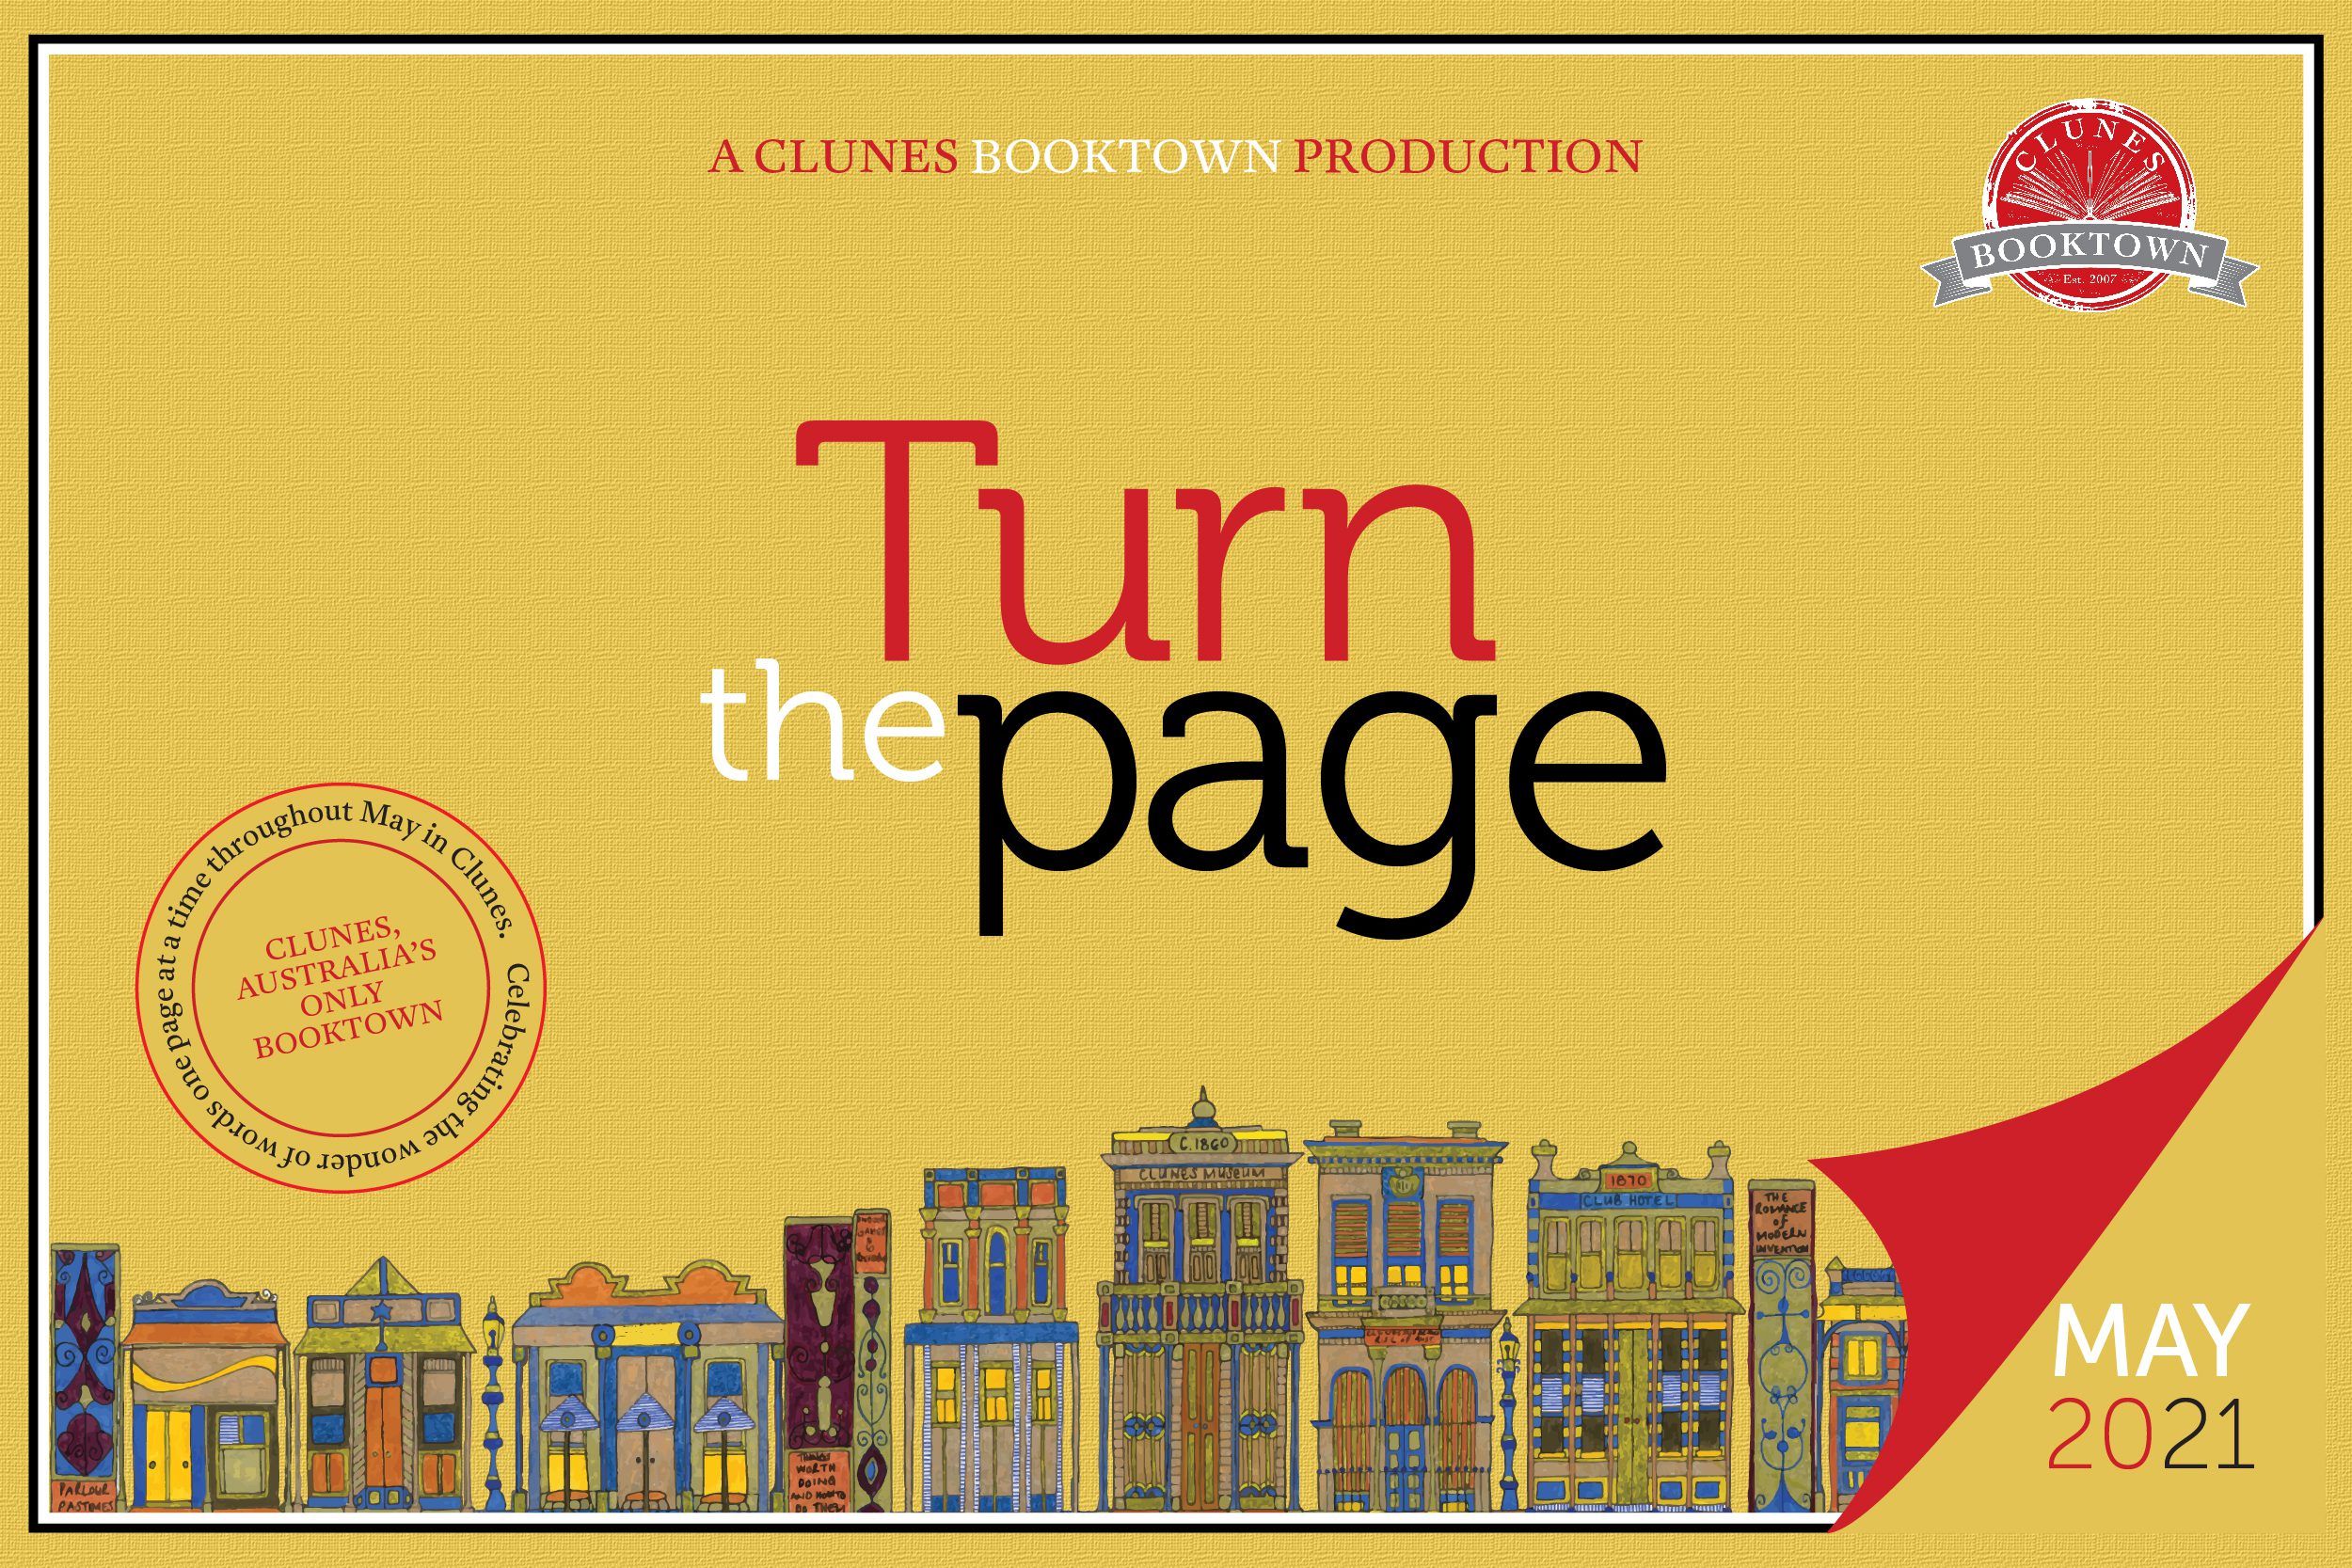 Turn the Page